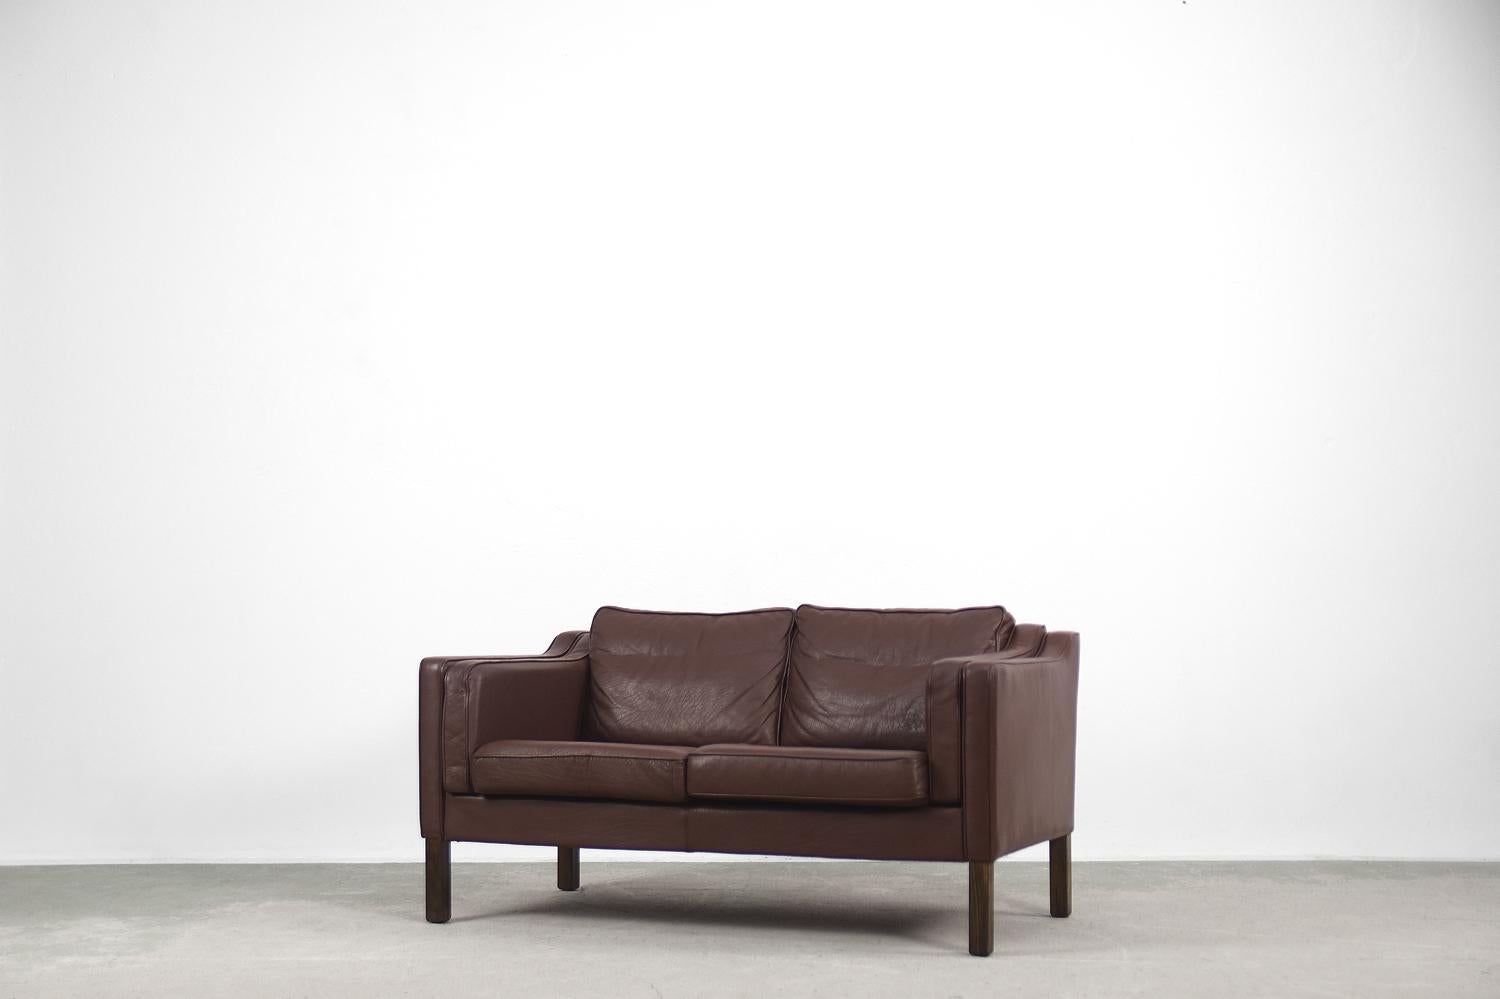 A set of elegant, leather sofas was manufactured in Denmark during the 1960s. This project was made according to the model 2212 designed by Børge Mogensen for Fredericia. This classic sofa style is well known to those who love Scandinavian